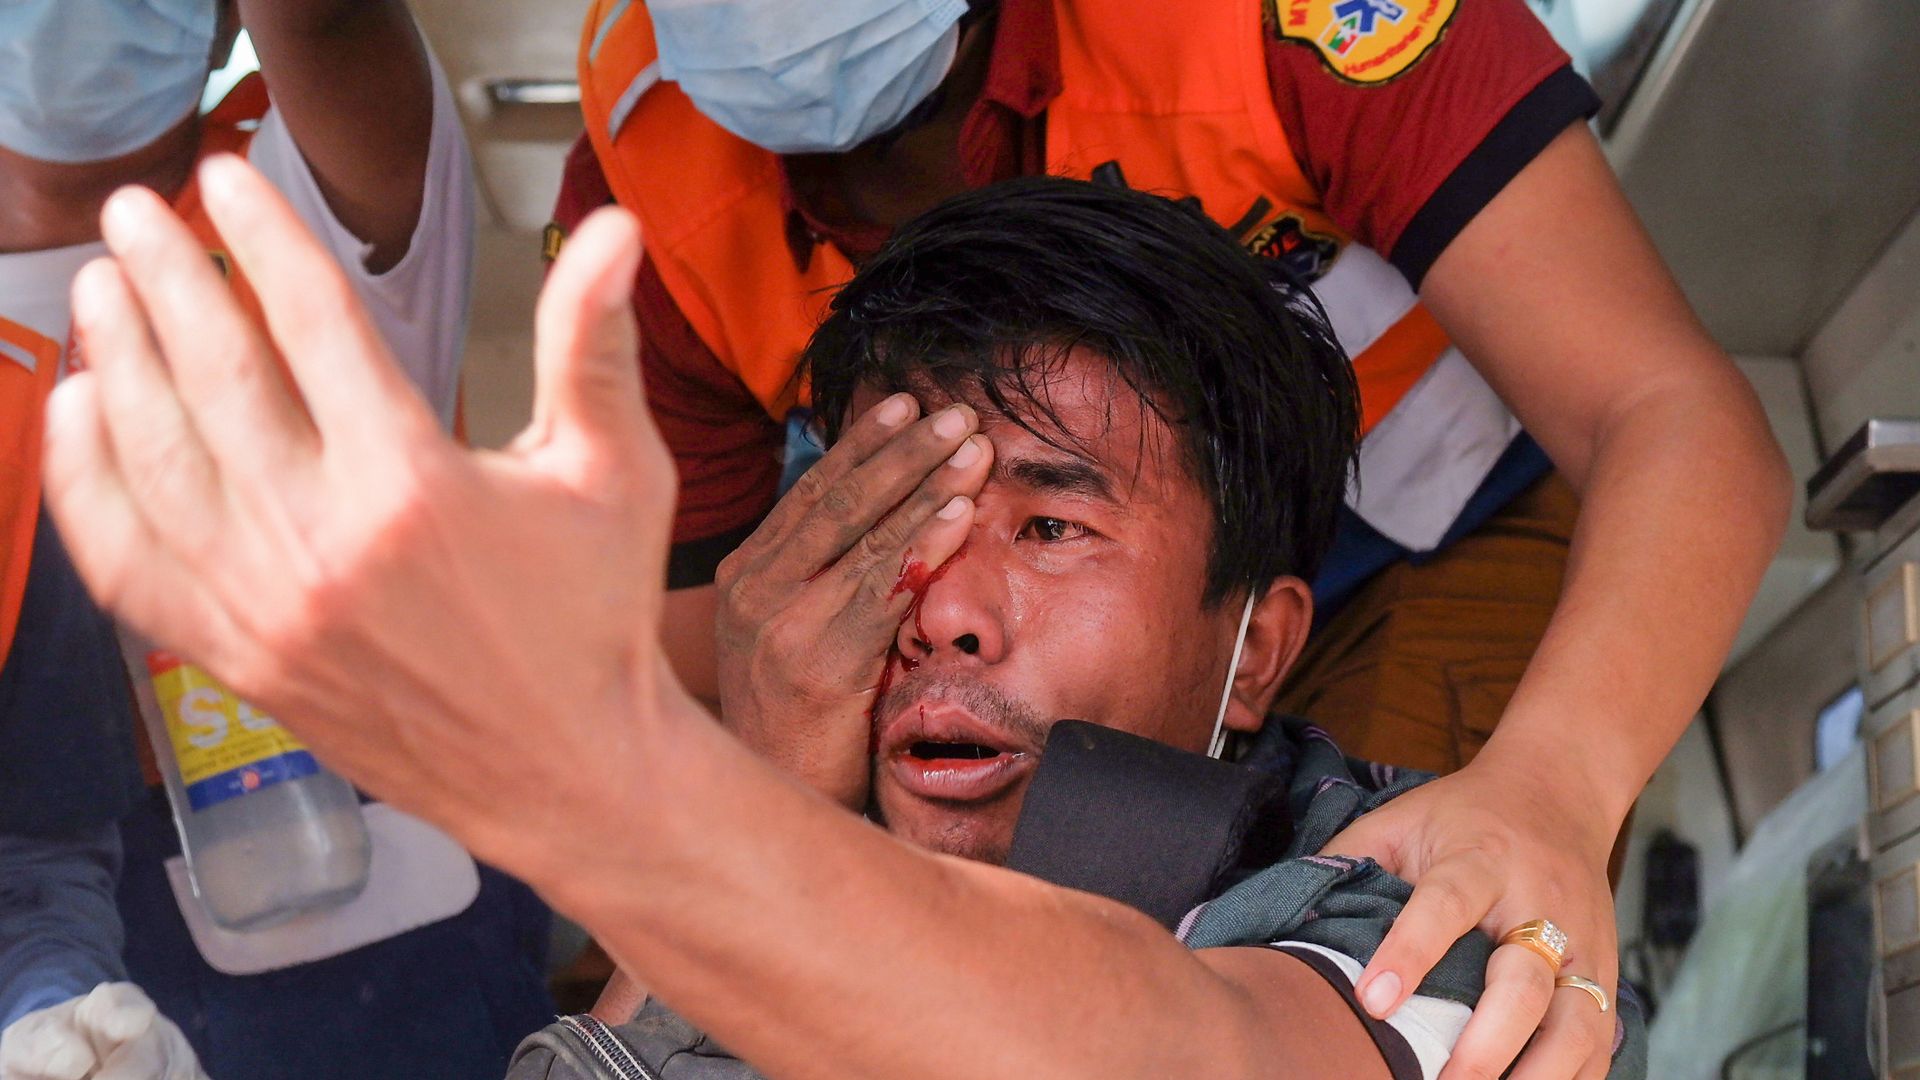 Picture of a protester injured by police in a protest in Myanmar